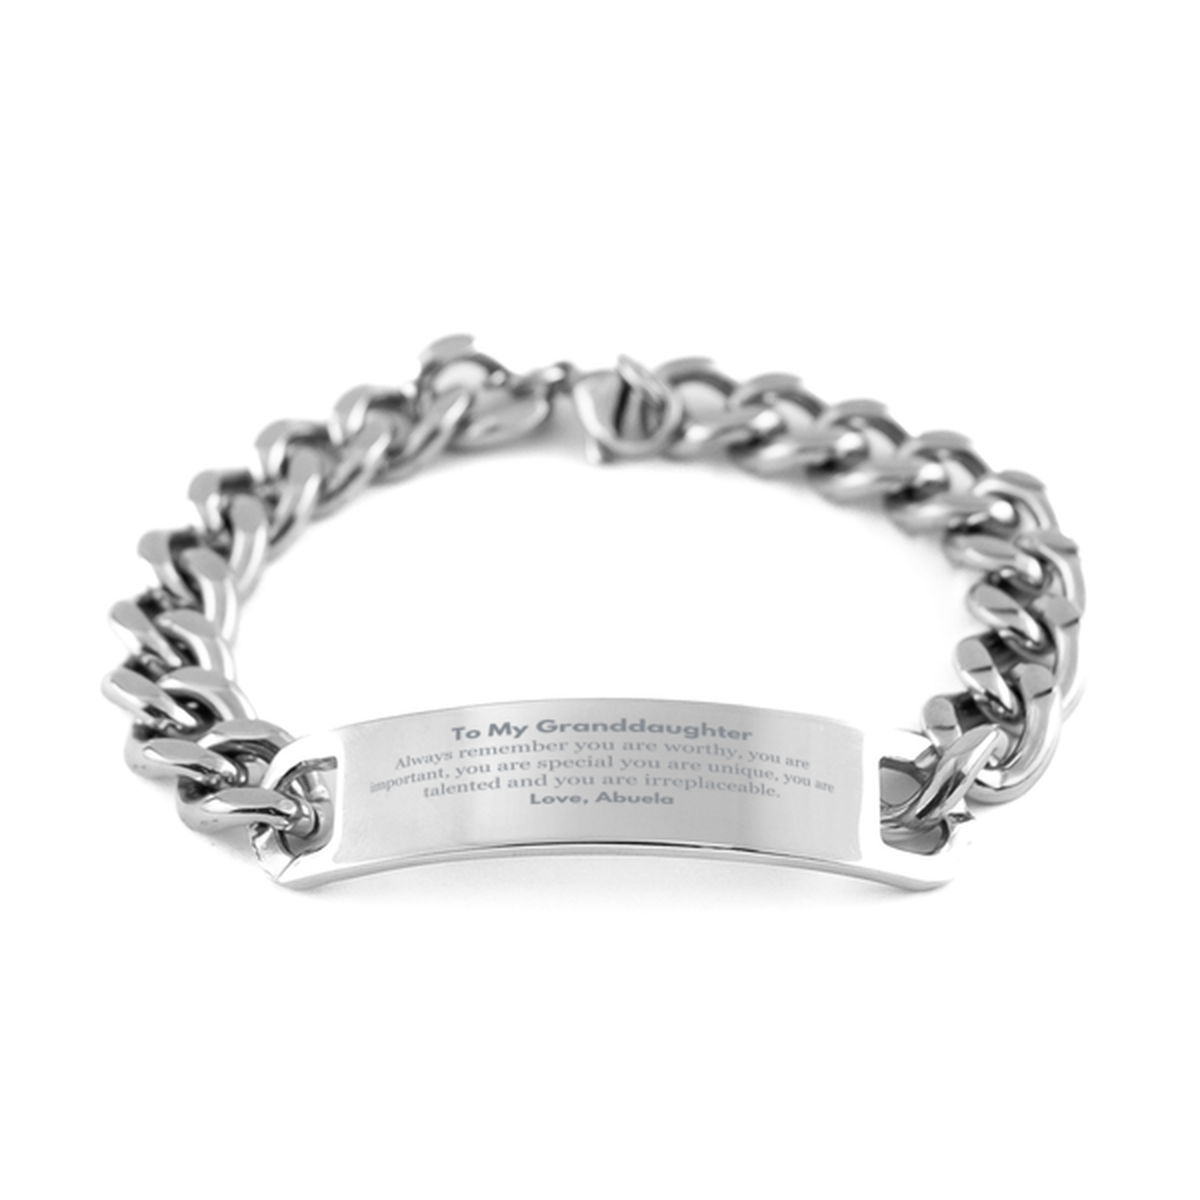 Granddaughter Birthday Gifts from Abuela, Inspirational Cuban Chain Stainless Steel Bracelet for Granddaughter Christmas Graduation Gifts for Granddaughter Always remember you are worthy, you are important. Love, Abuela